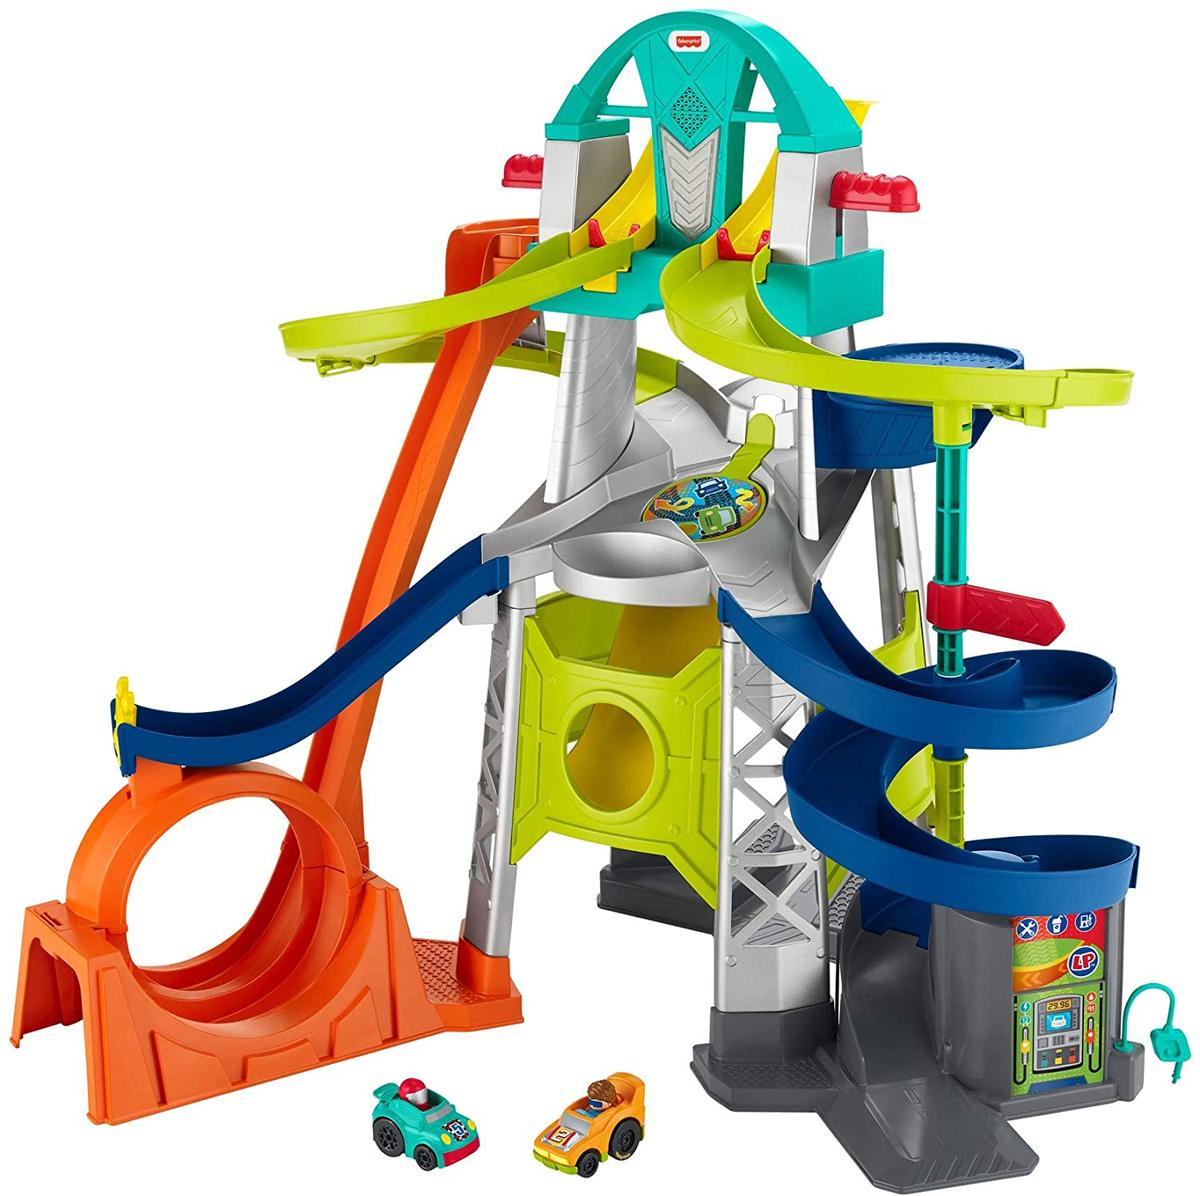 Fisher-Price Little People Launch and Loop Raceway Playset for $33.74 Shipped